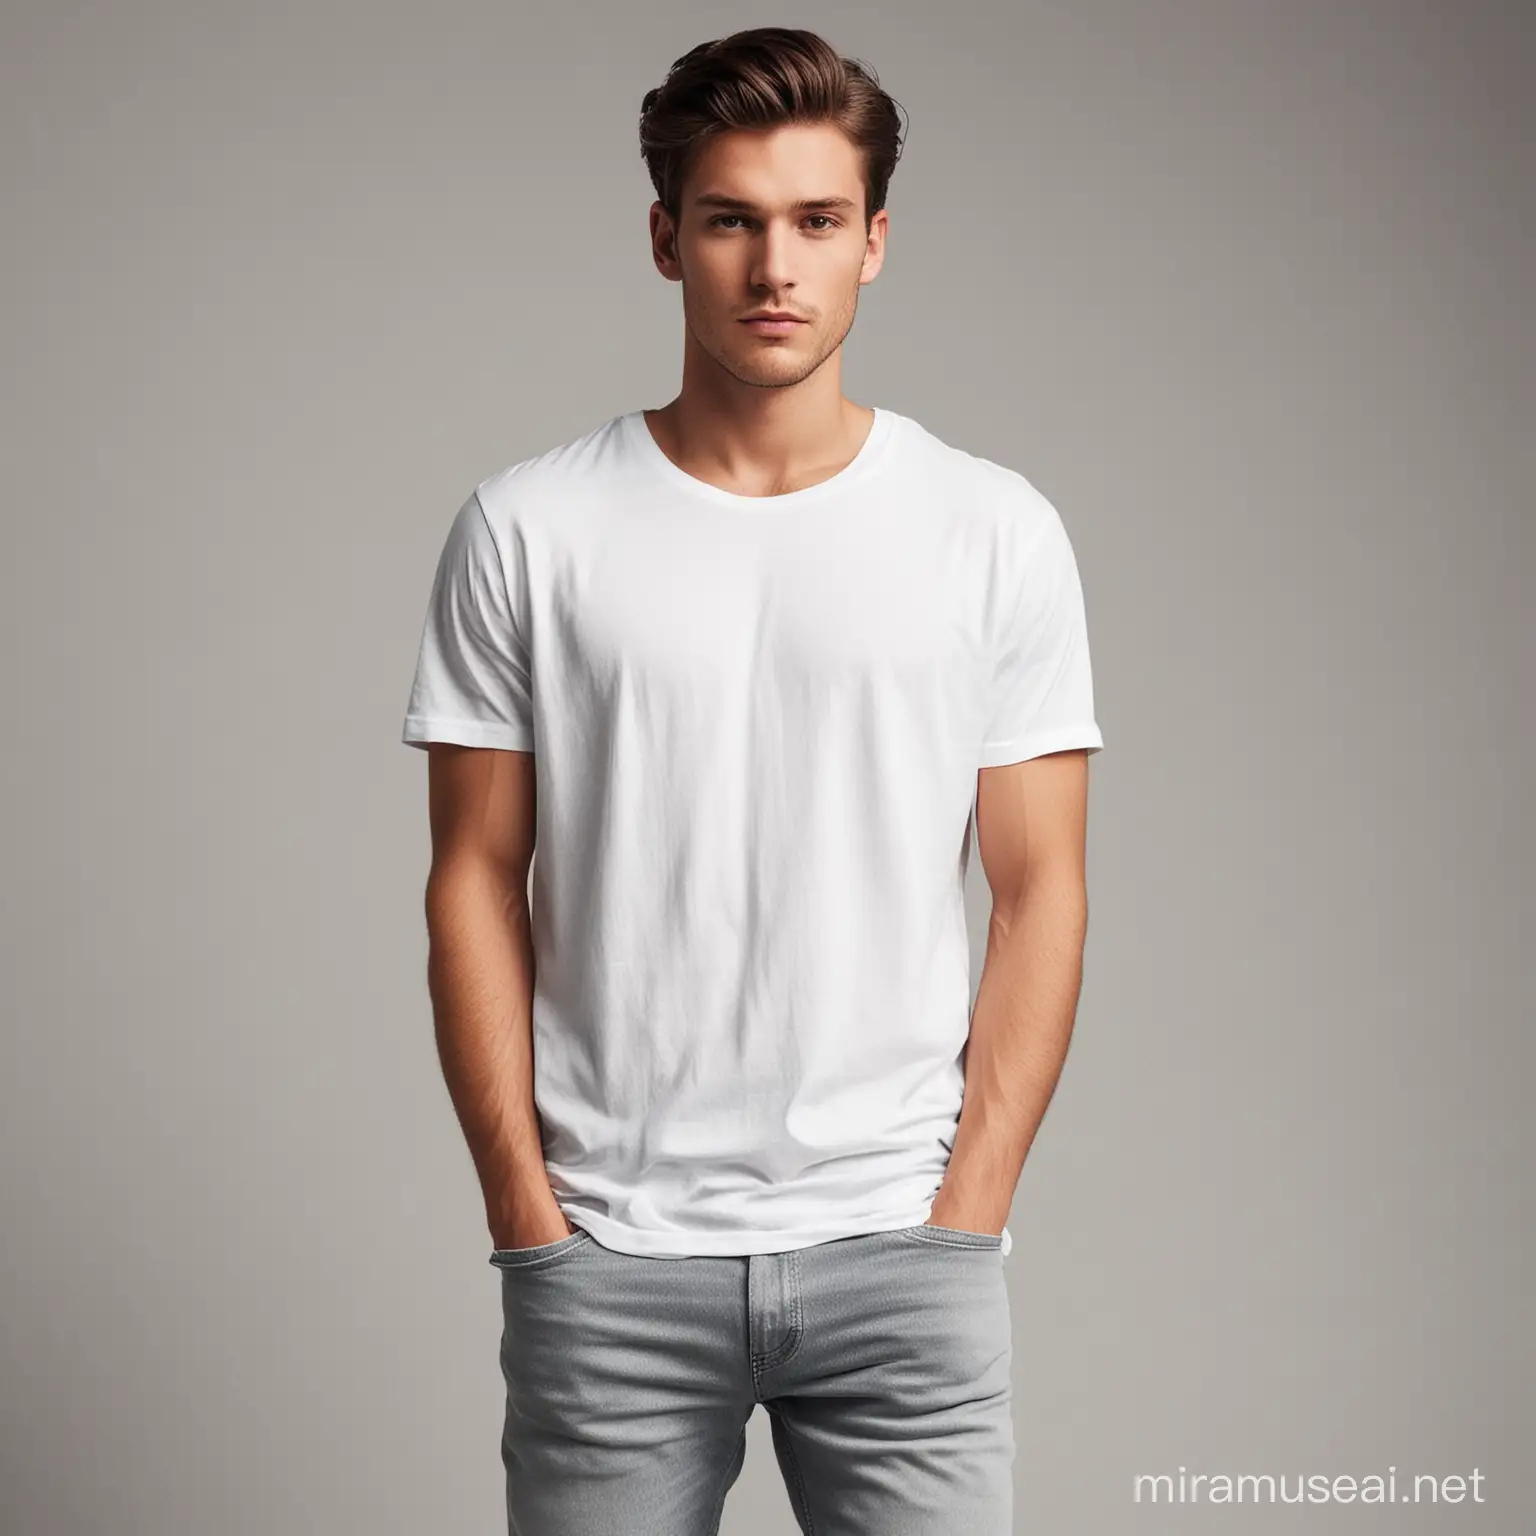 create for me a male model wearing a white t-shirt without prints. See the whole body